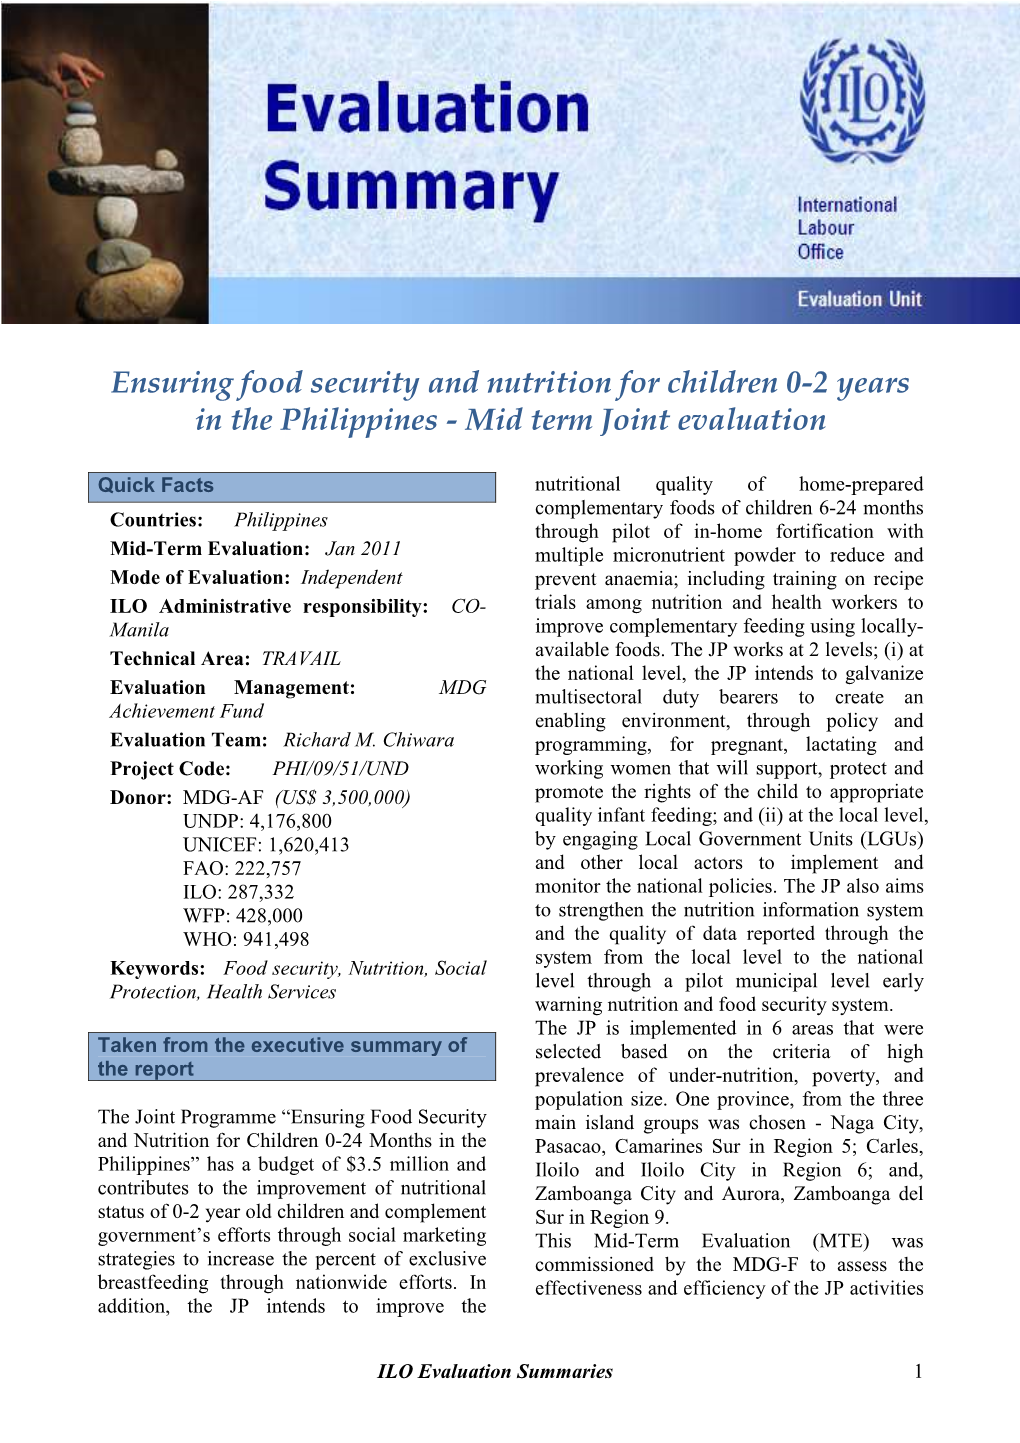 Ensuring Food Security and Nutrition for Children 0-2 Years in the Philippines - Mid Term Joint Evaluation